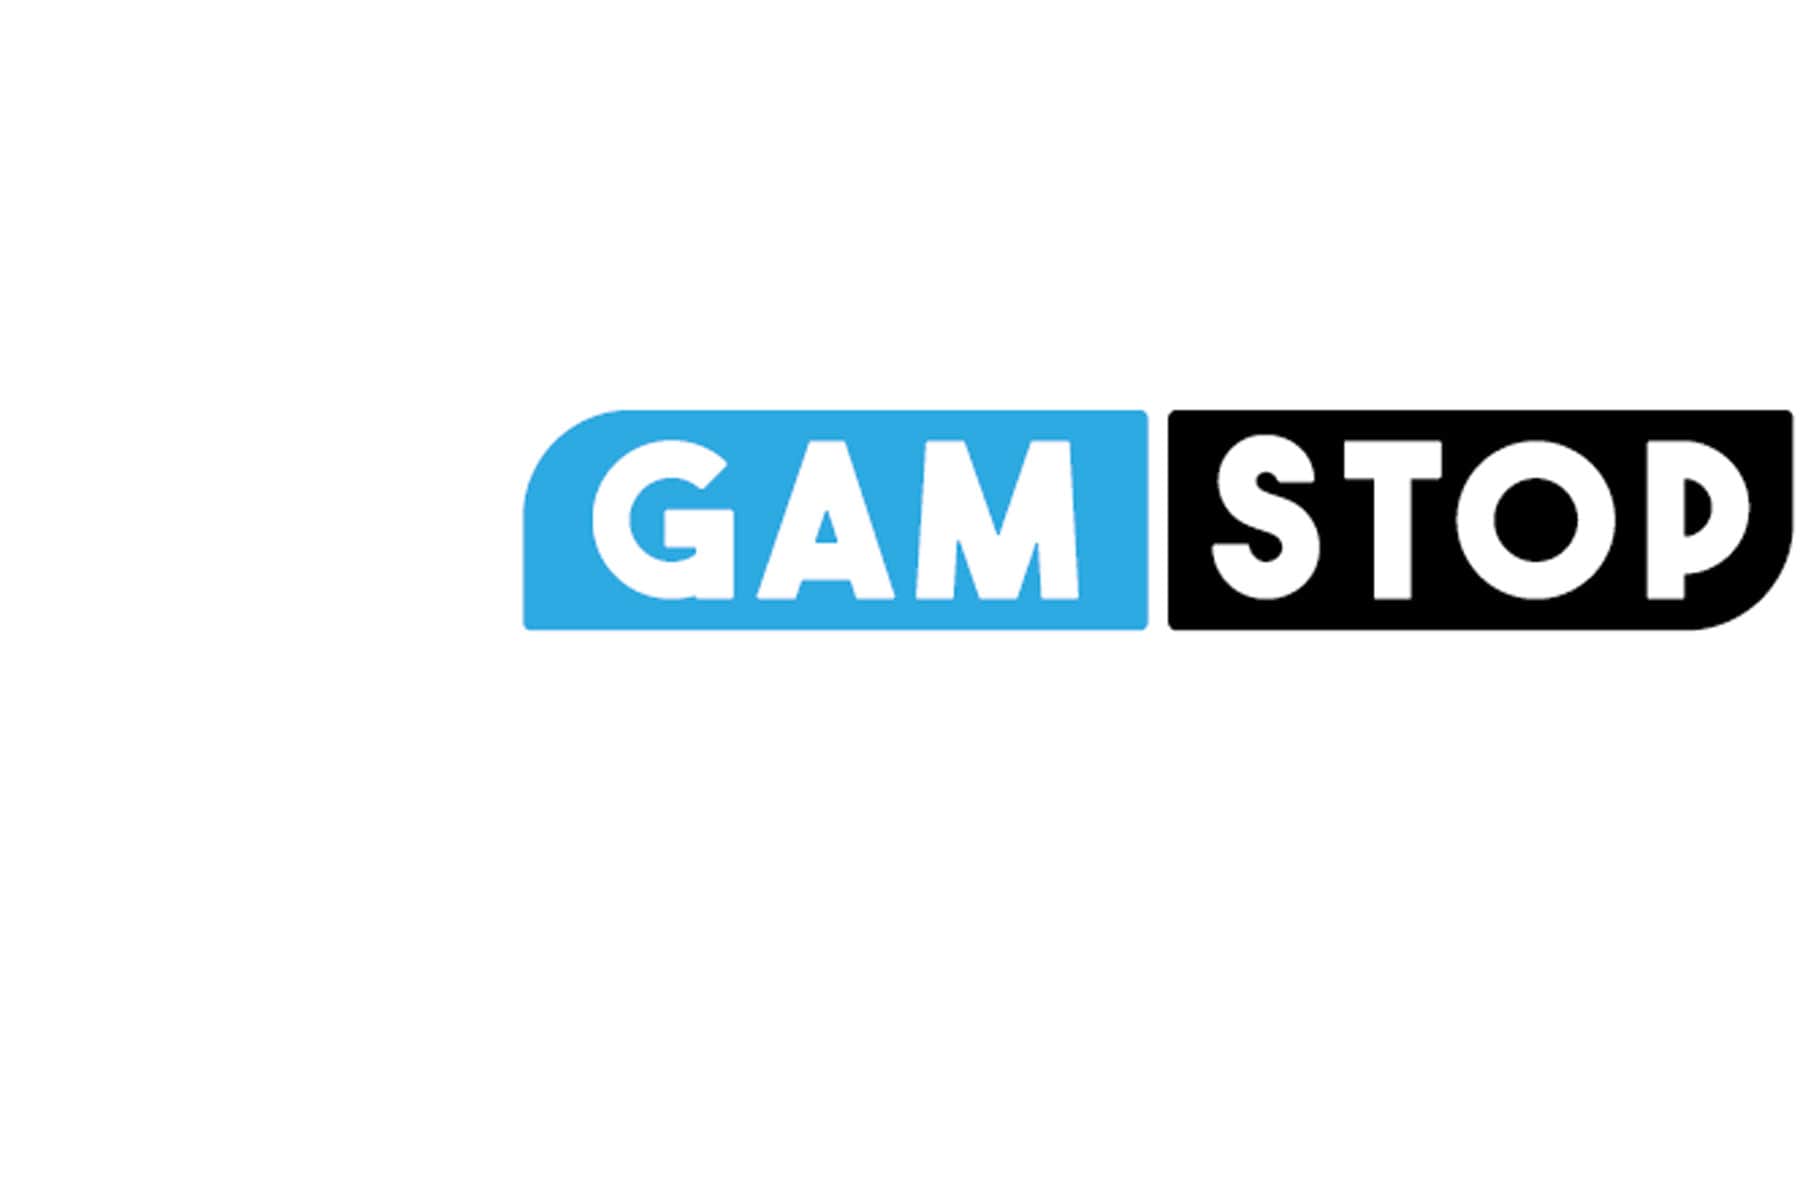 Control your online gambling with GAMSTOP